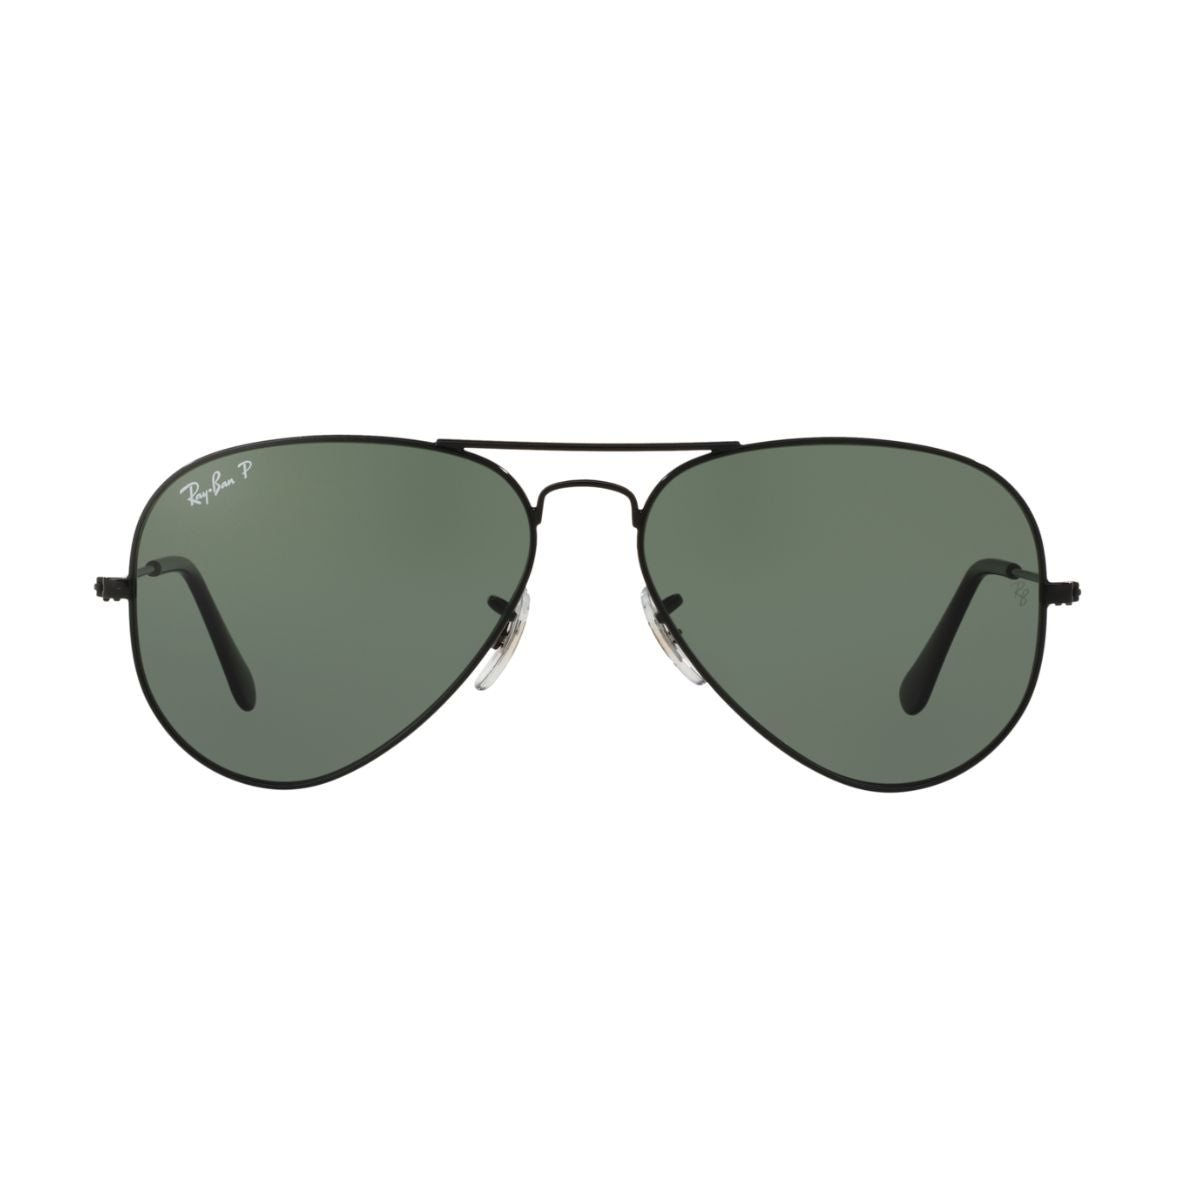 "Buy Online Ray Ban 3025 002/58  Polarized Sunglass For Men And Women At Optorium"